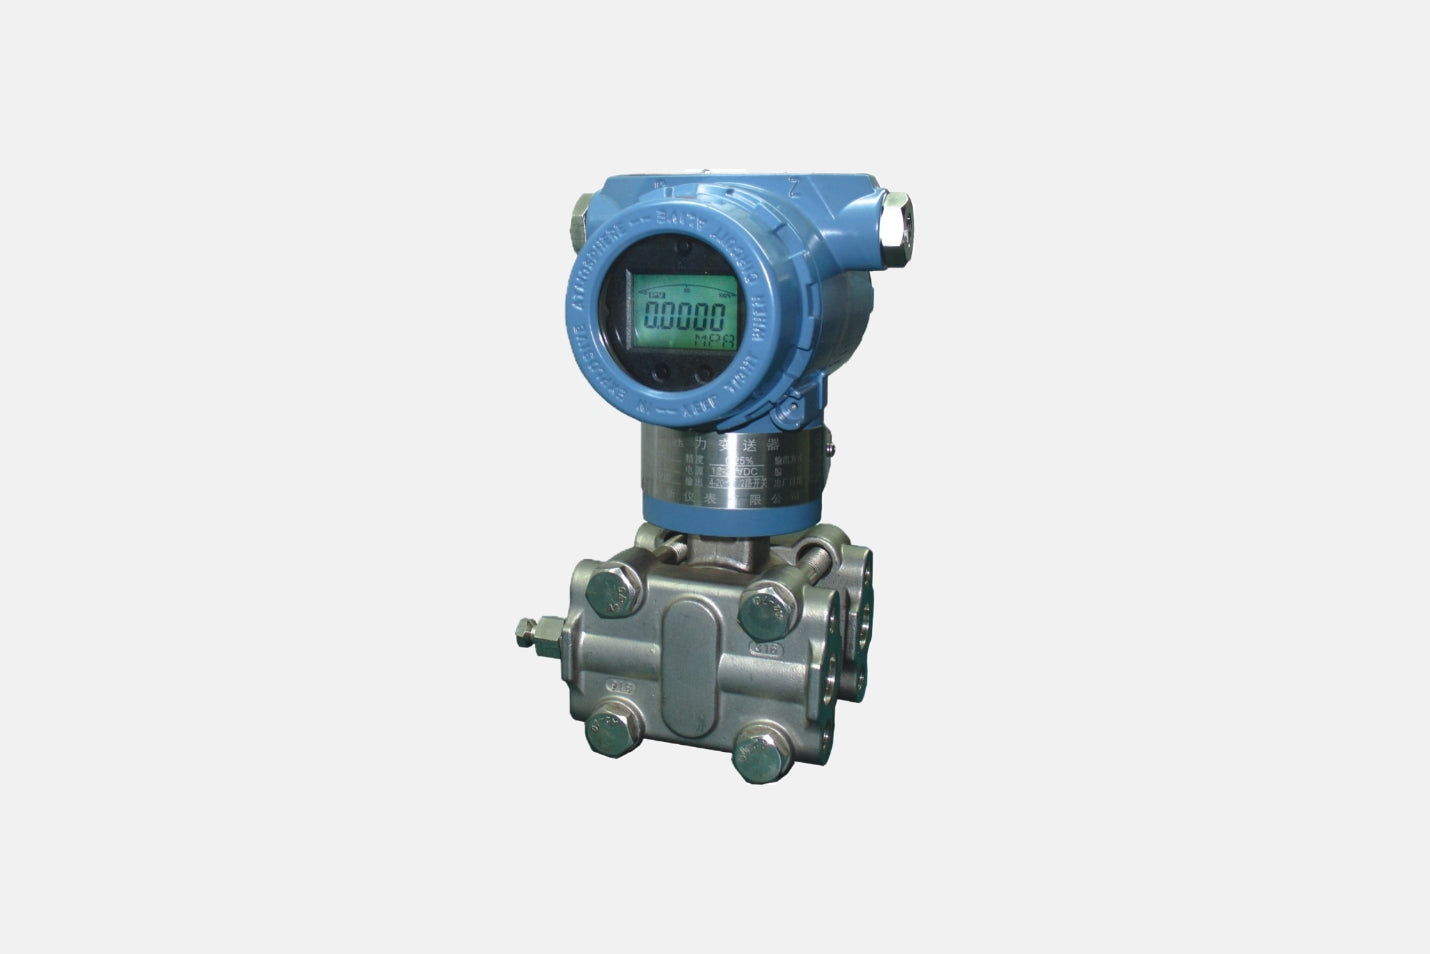 Aoxin YSB3351S Differential Pressure Transmitter Price